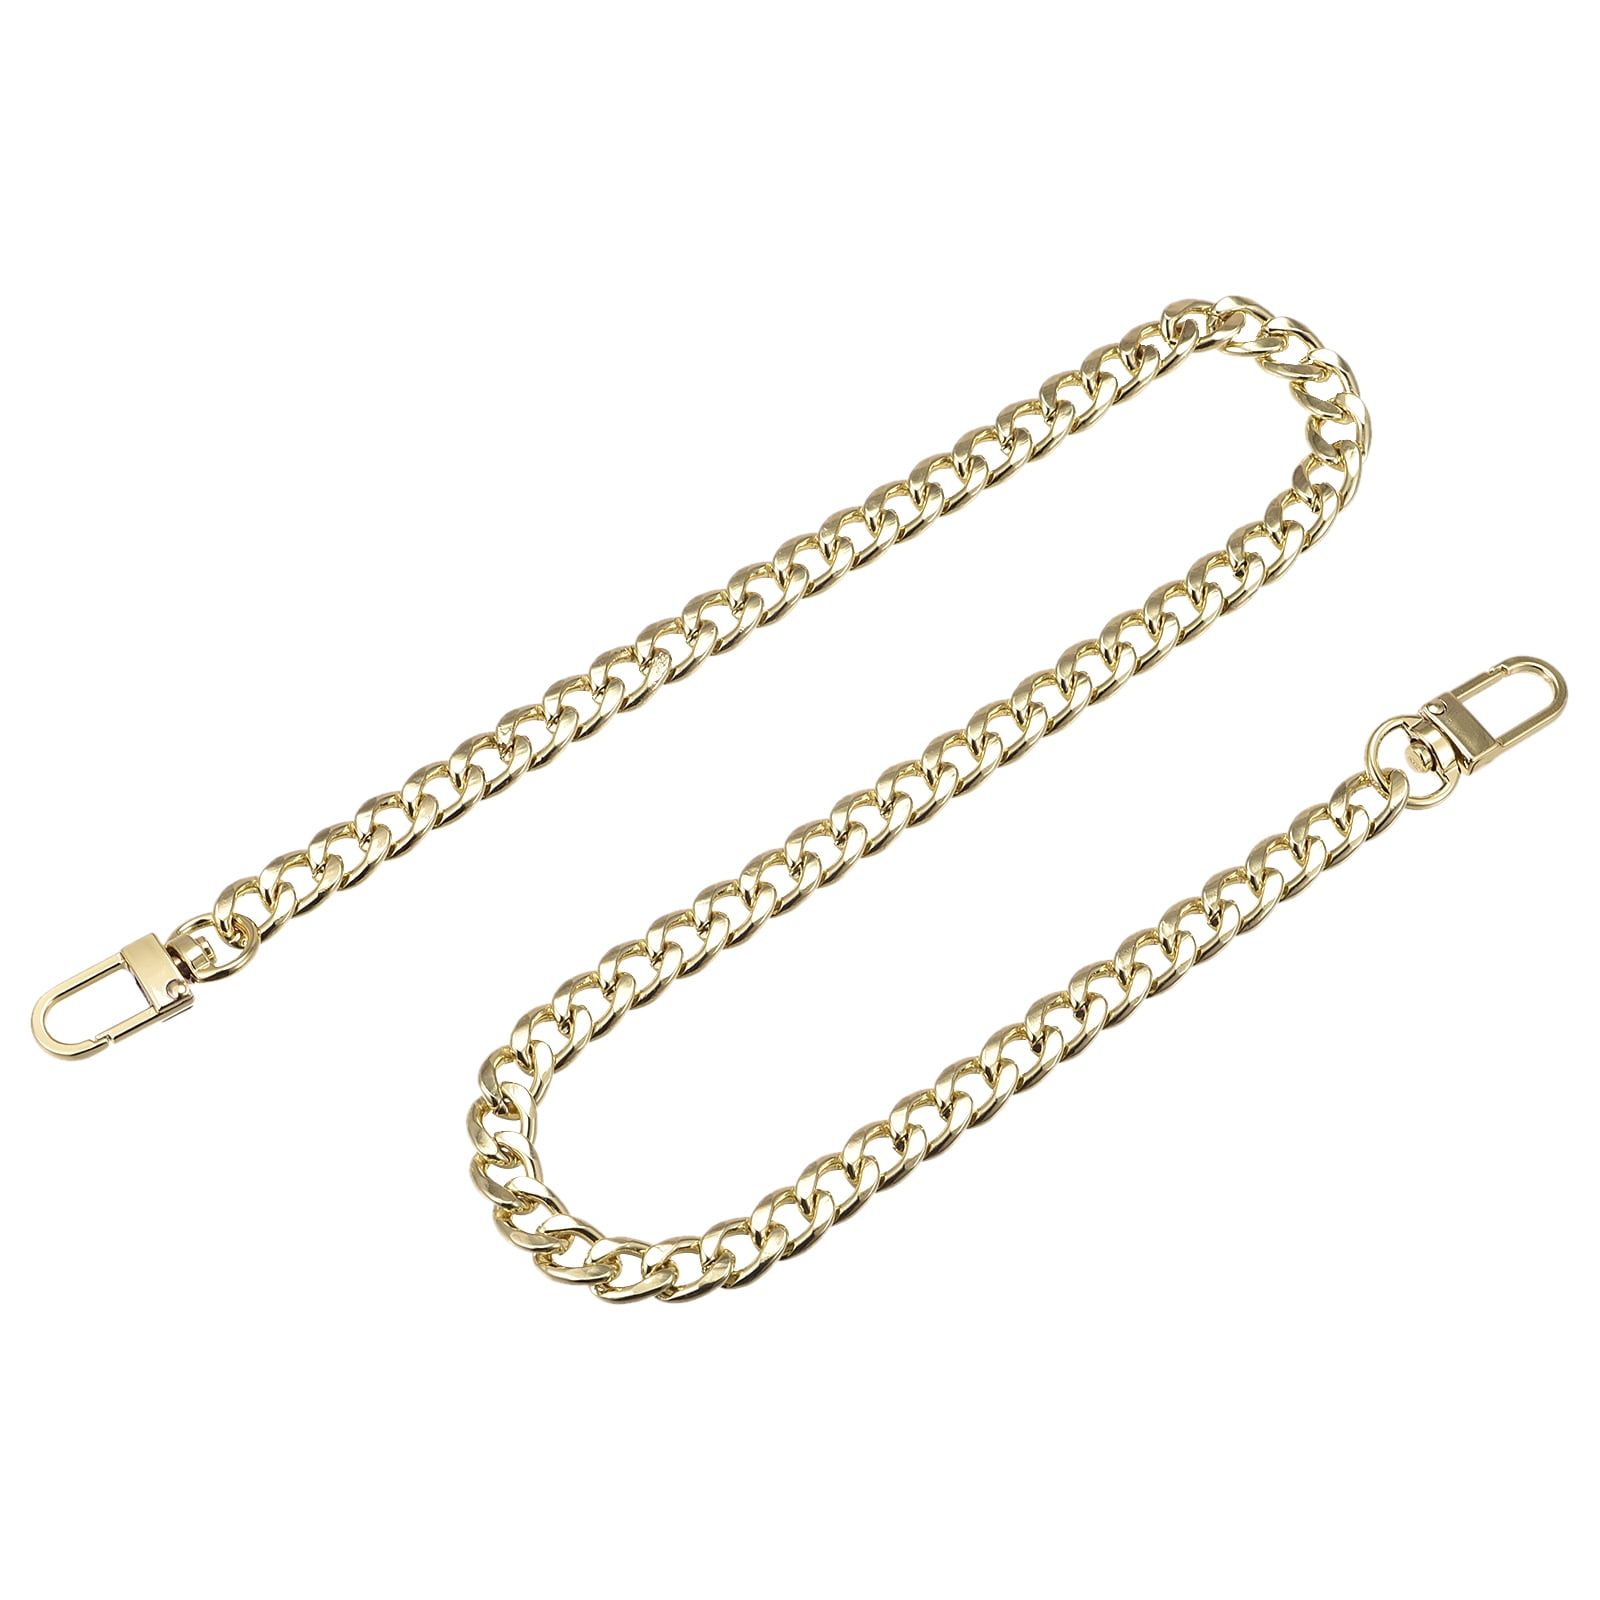 3FT Gold Plated Chain Necklace Extenders Bag Chain Replacement Fit for  Jewelry Making DIY Necklace Bracelet Handbag Chain Iron Replacement Strap